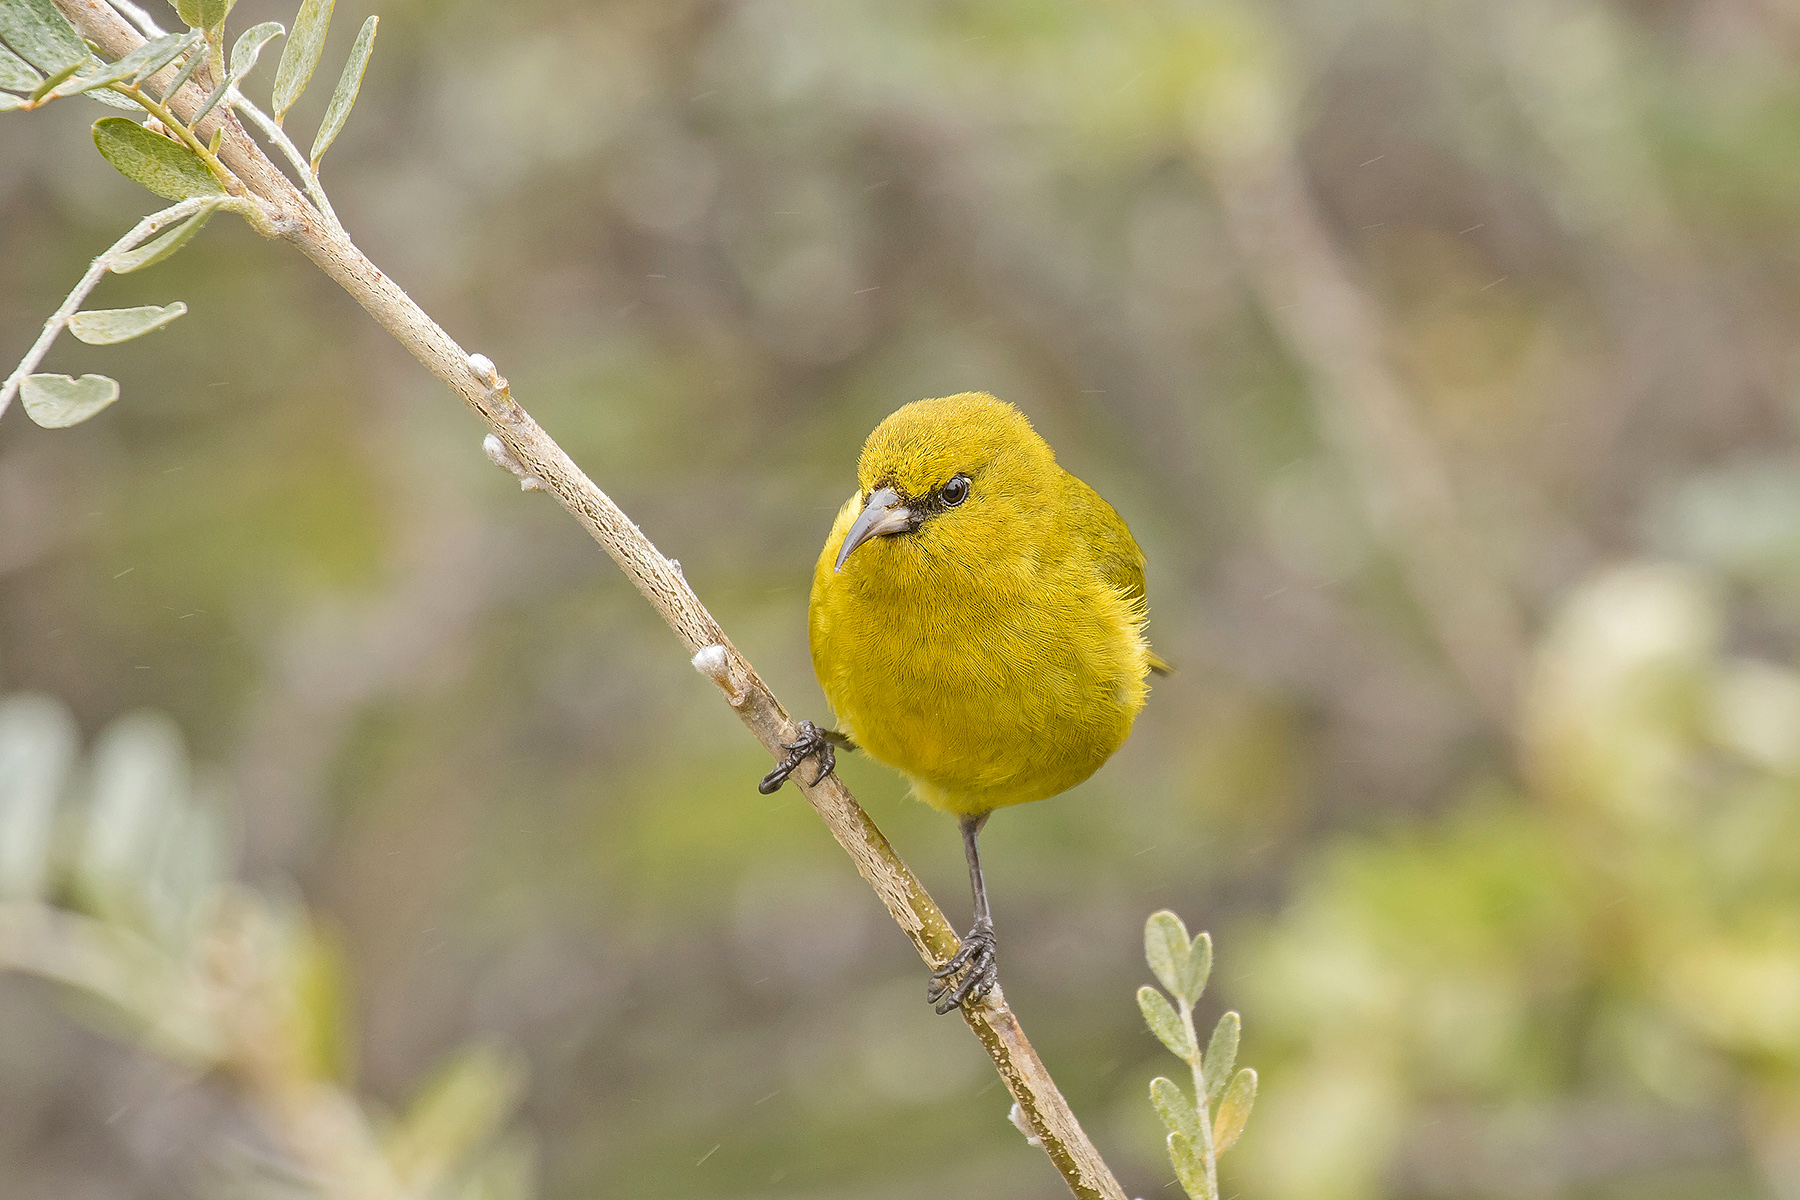 Hawaii Amakihi on our Hawaii birding tour (image by Pete Morris)